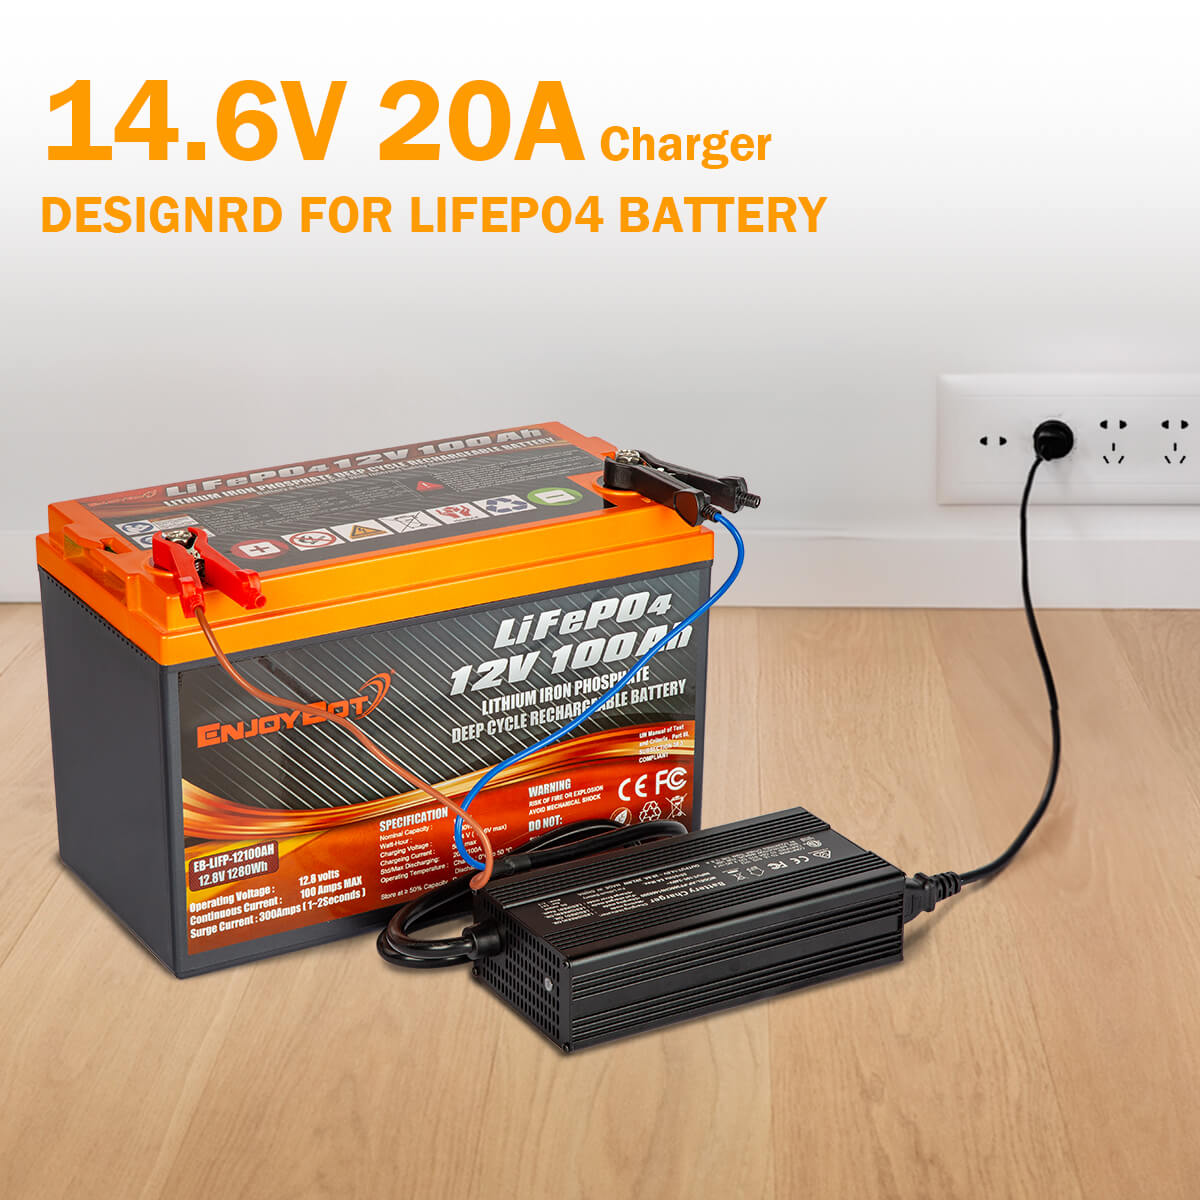 Enjoybot 14.6V-20A LiFePO4 Lithium Battery Charger Alligator Clamps